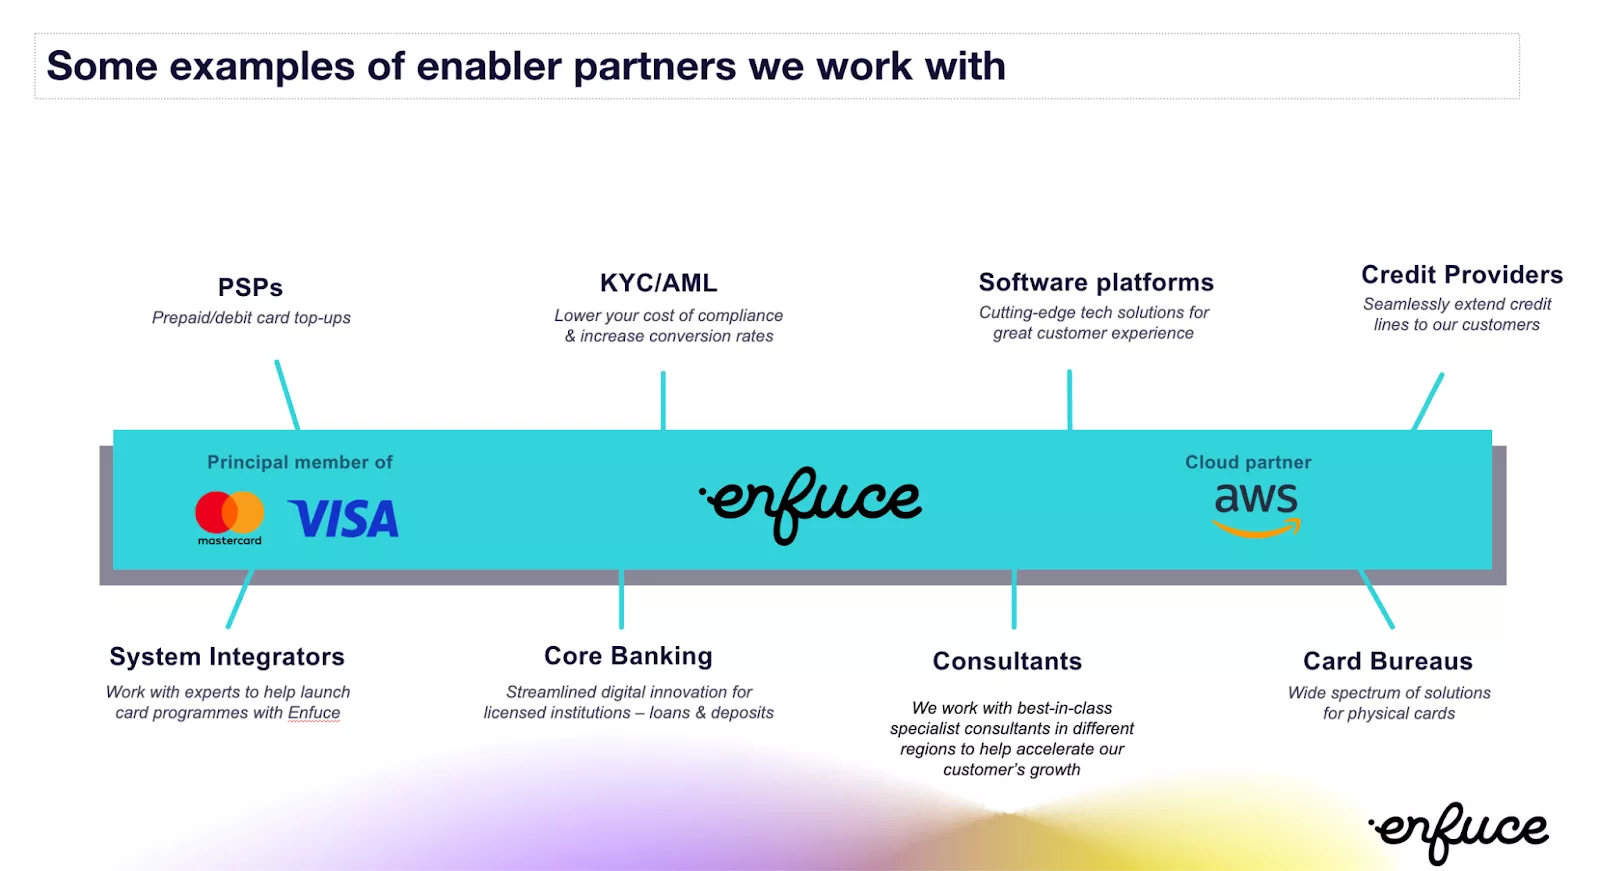 Enfuce and our partners